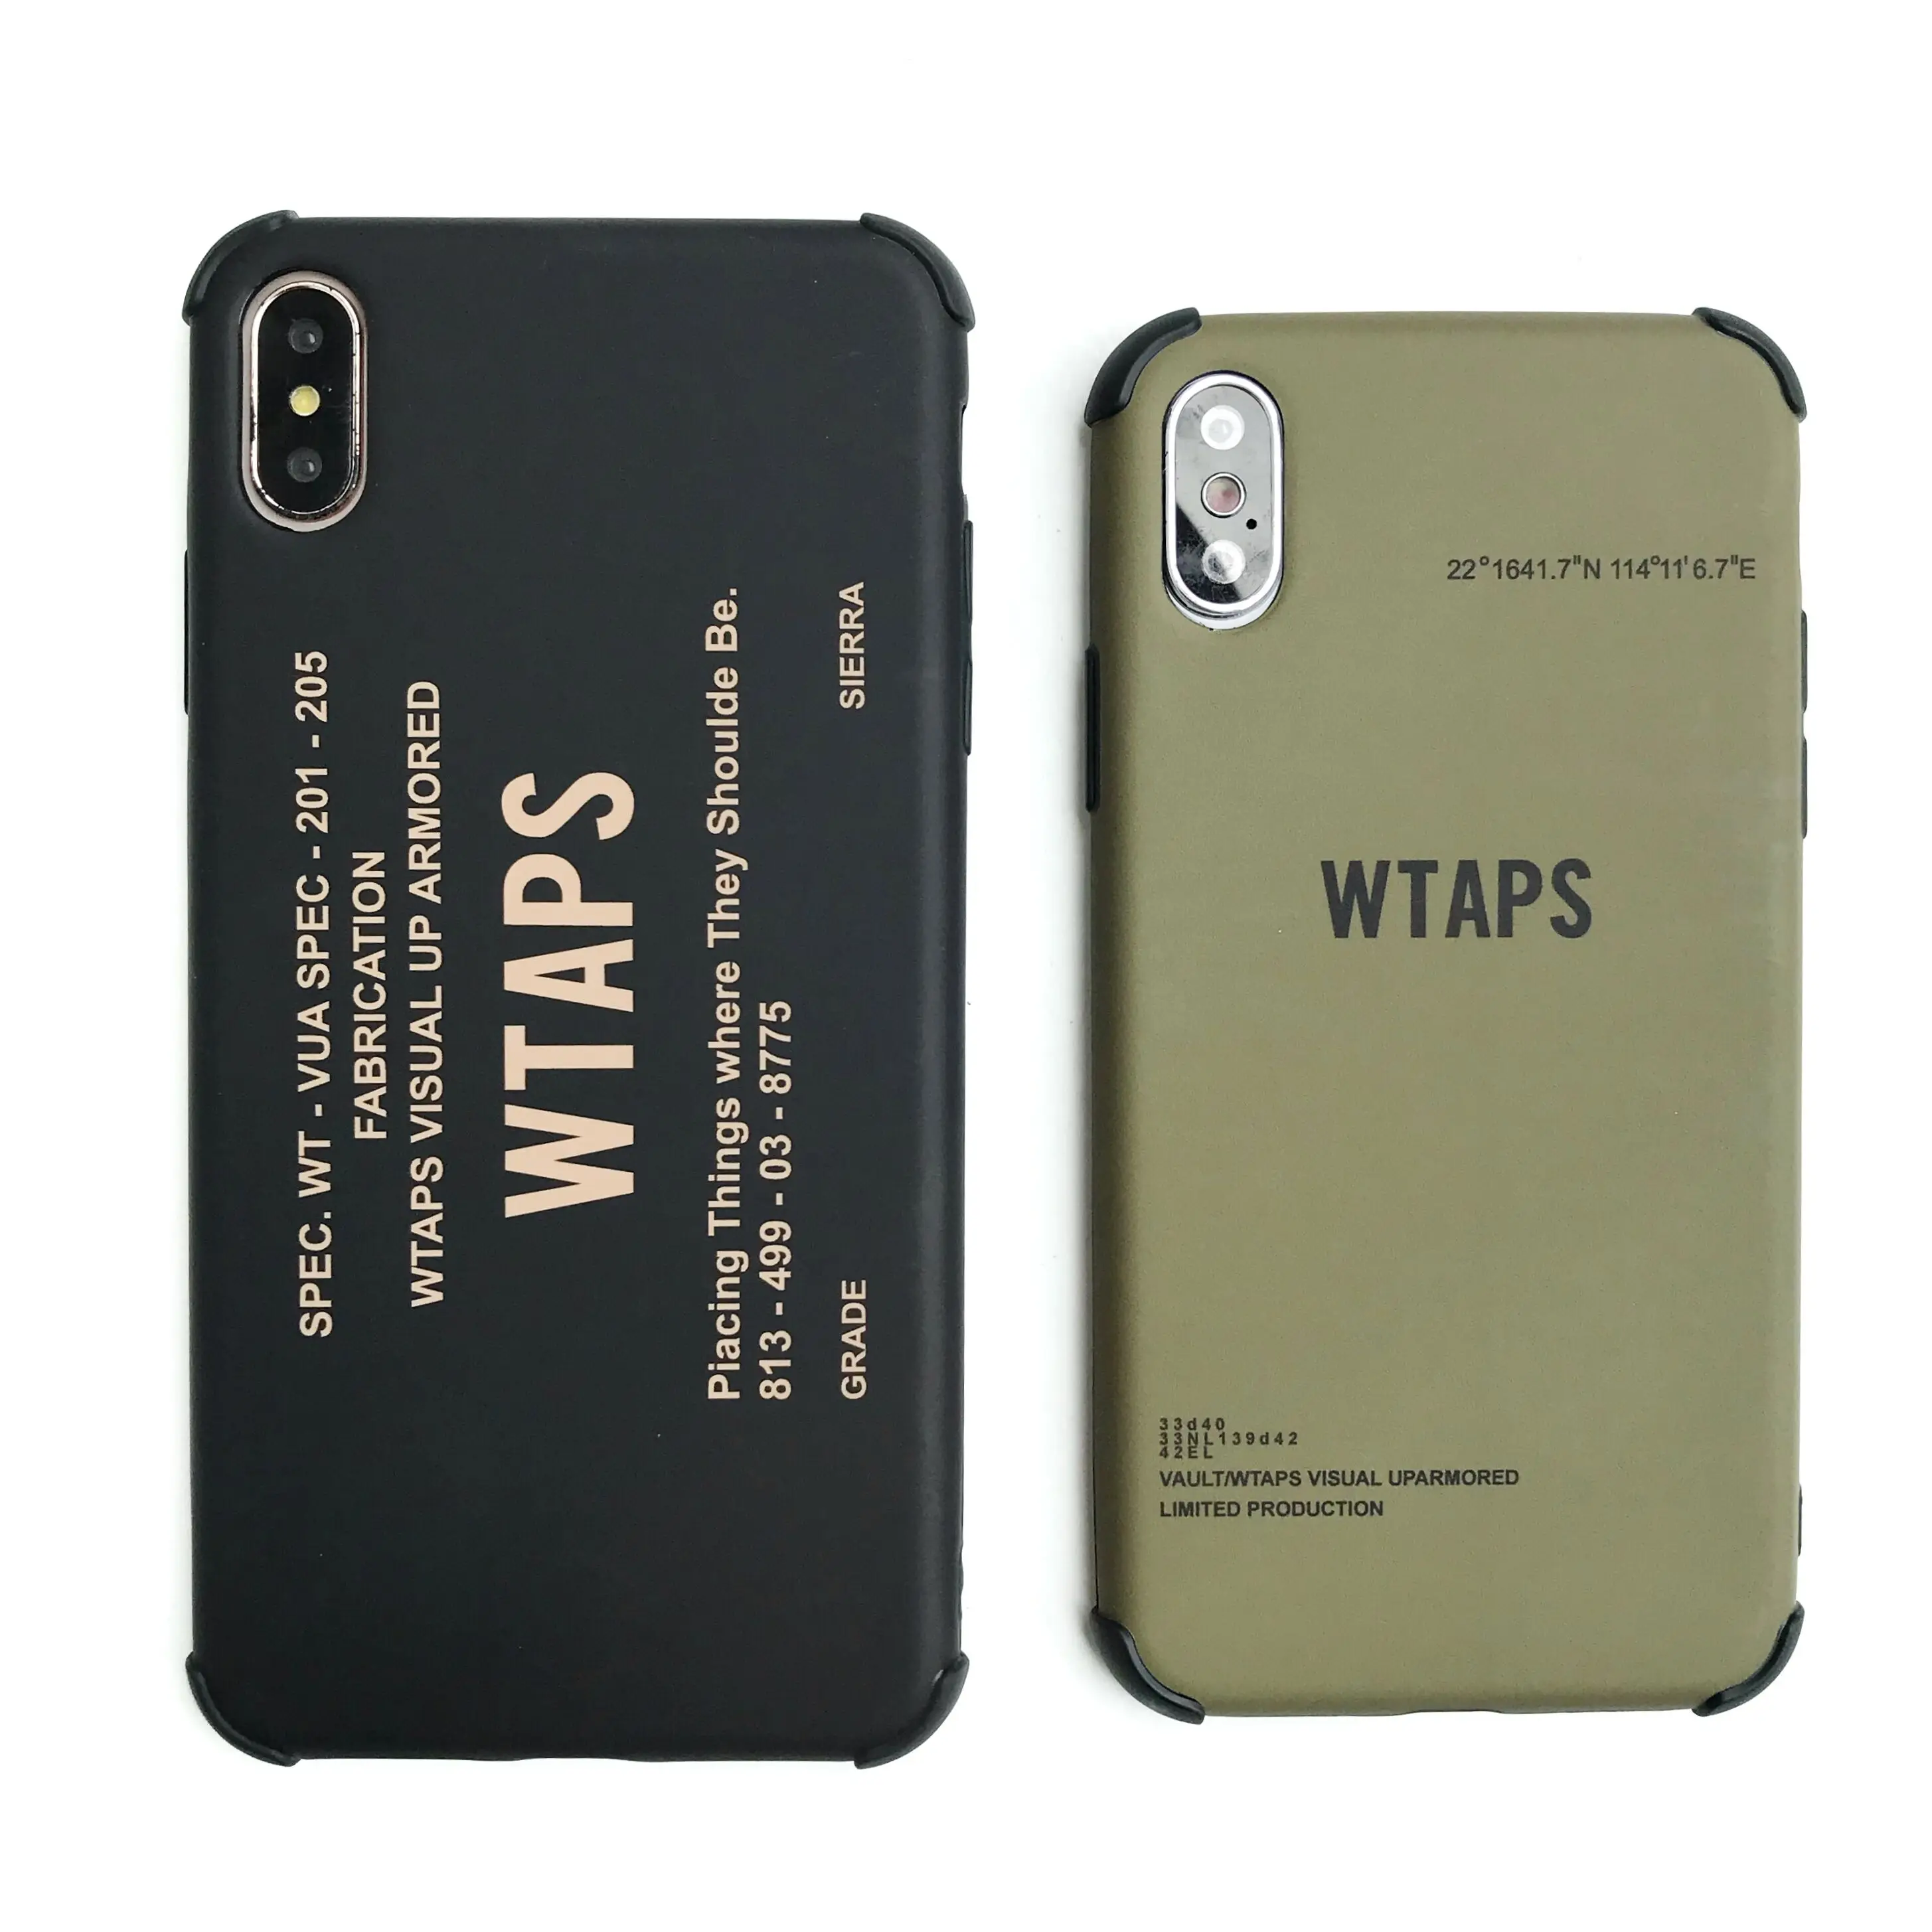 

Luxury Fashion Japan Wtaps Soft silicon cover case for iPhone 10 7 X 7plus 6 6S plus 8 8plus X XS Max Xr shockproof Fundas Shell